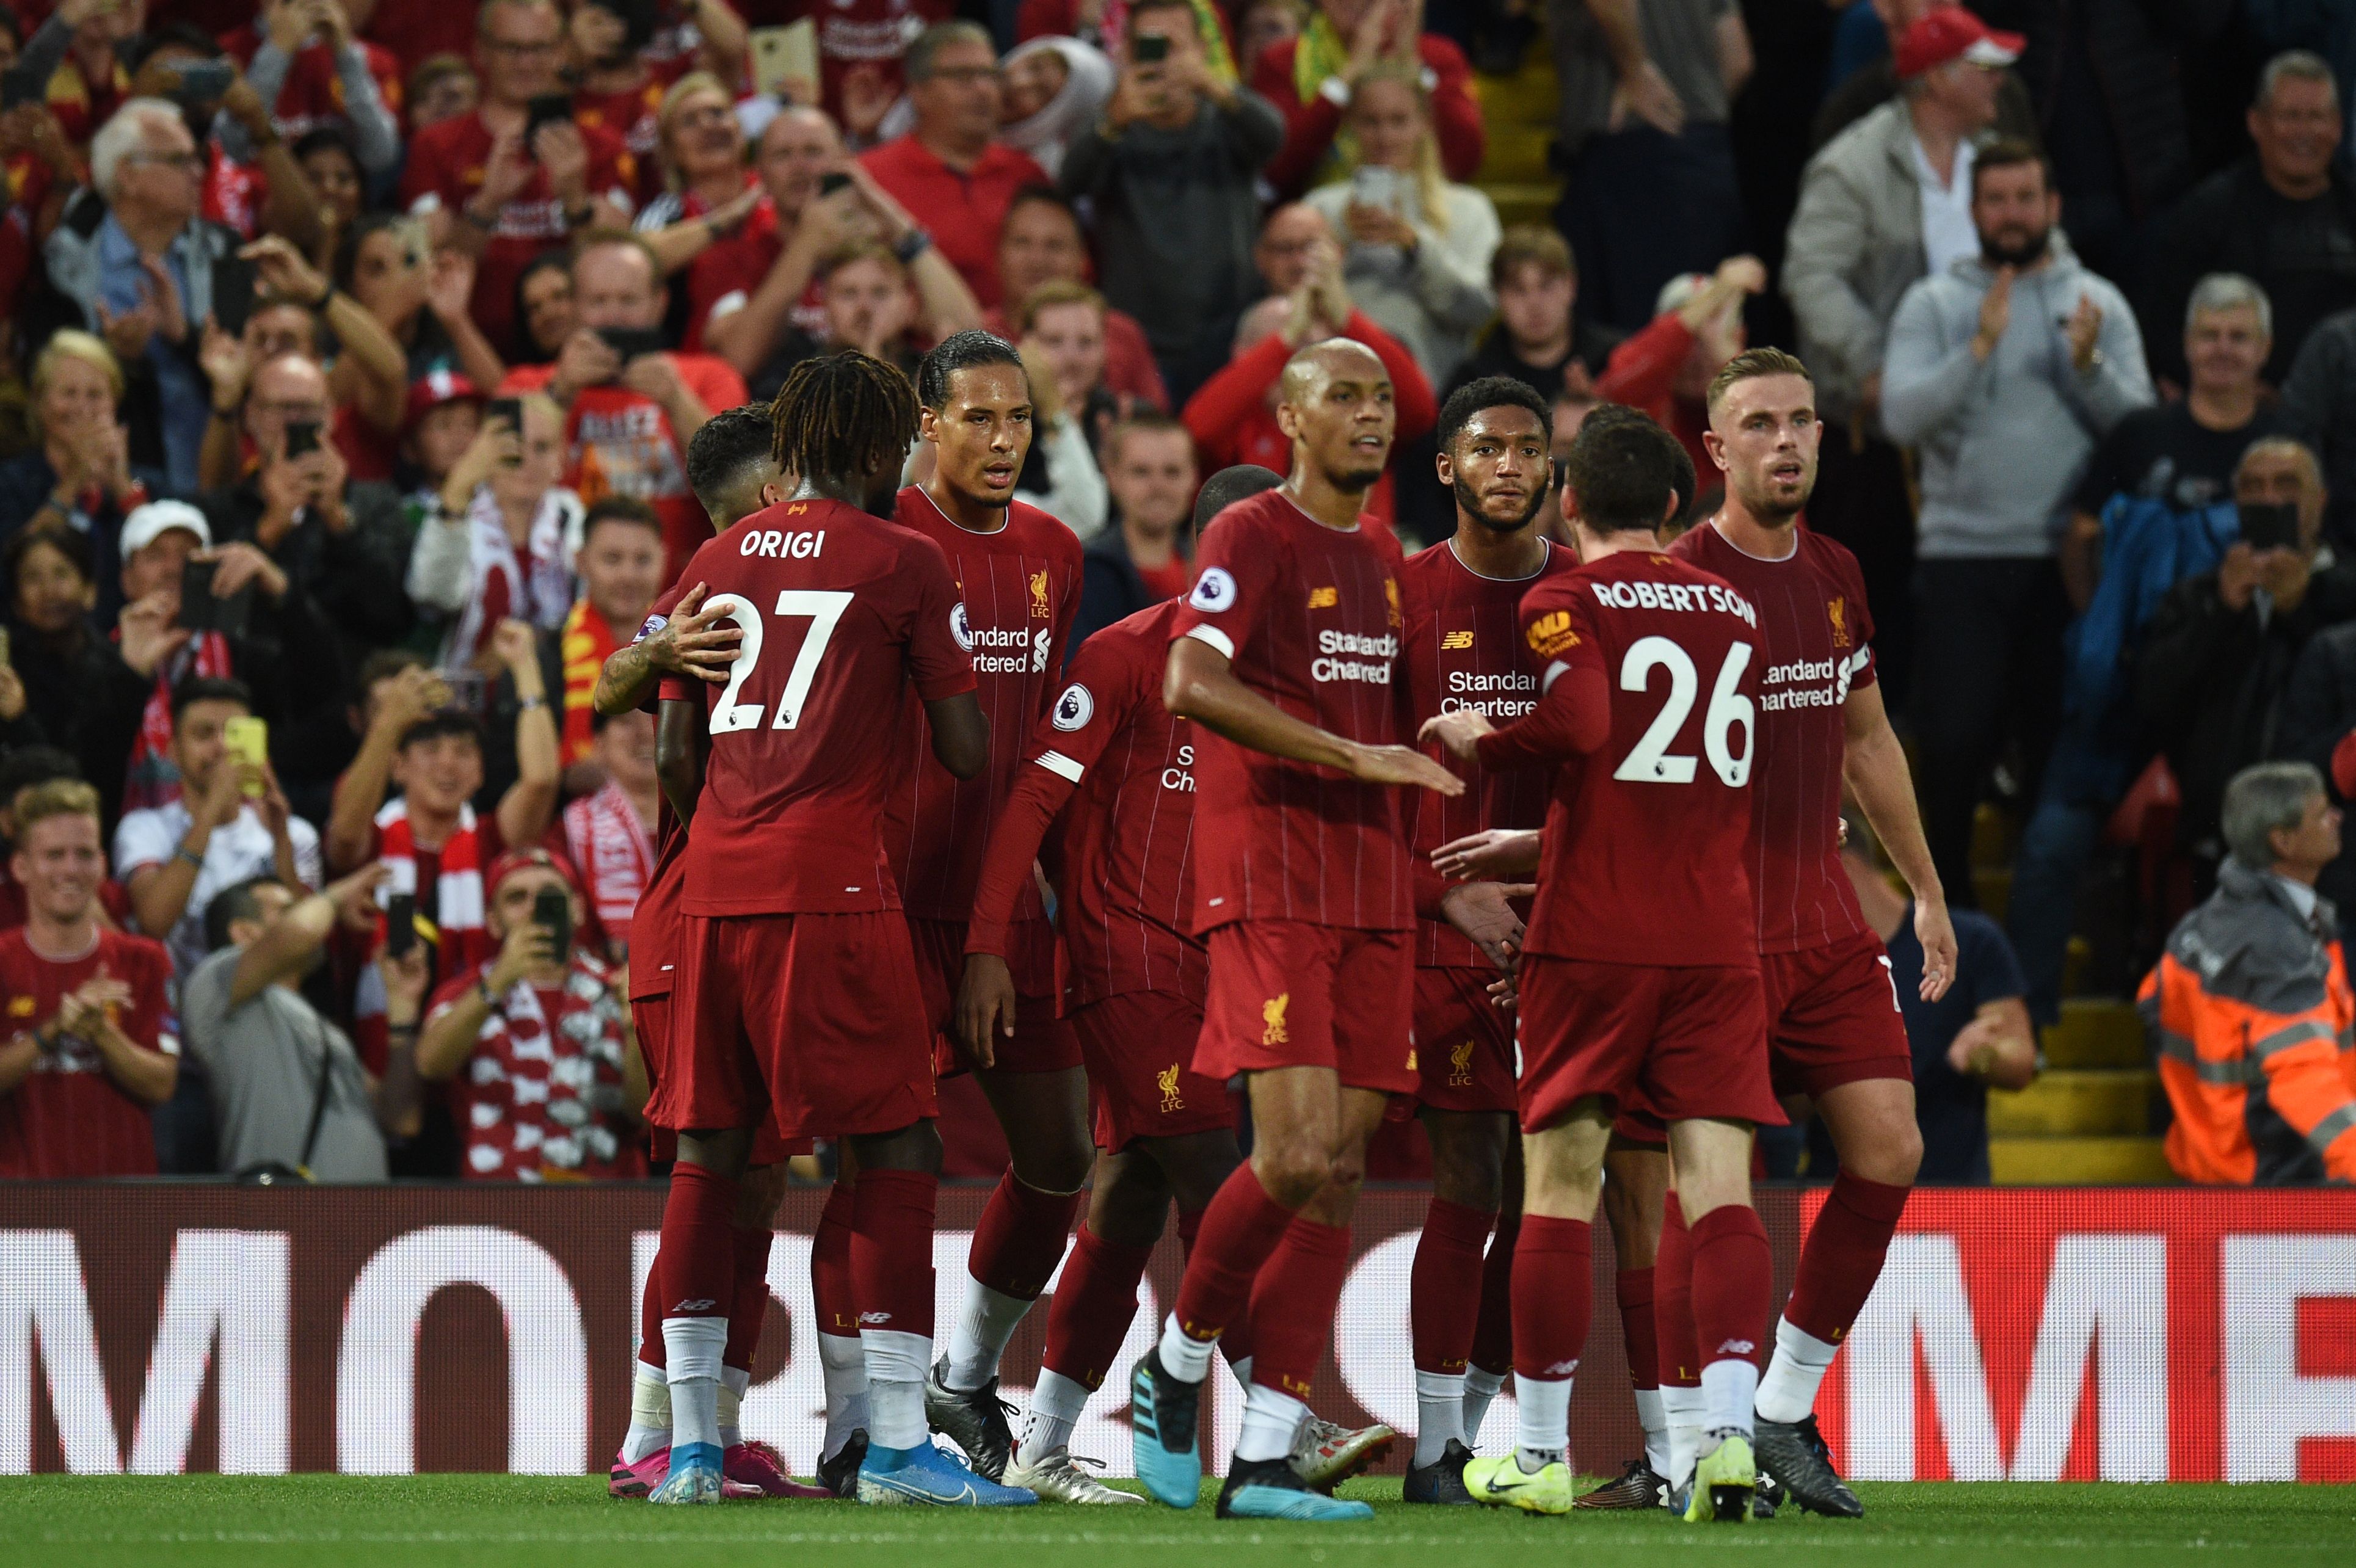 Liverpool's Dutch defender Virgil van Dijk (C)celebrates with teammates after he scores the team's third goal during the English Premier League football match between Liverpool and Norwich City at Anfield in Liverpool, north west England on August 9, 2019. (Photo by Oli SCARFF / AFP) / RESTRICTED TO EDITORIAL USE. No use with unauthorized audio, video, data, fixture lists, club/league logos or 'live' services. Online in-match use limited to 120 images. An additional 40 images may be used in extra time. No video emulation. Social media in-match use limited to 120 images. An additional 40 images may be used in extra time. No use in betting publications, games or single club/league/player publications. /         (Photo credit should read OLI SCARFF/AFP/Getty Images)